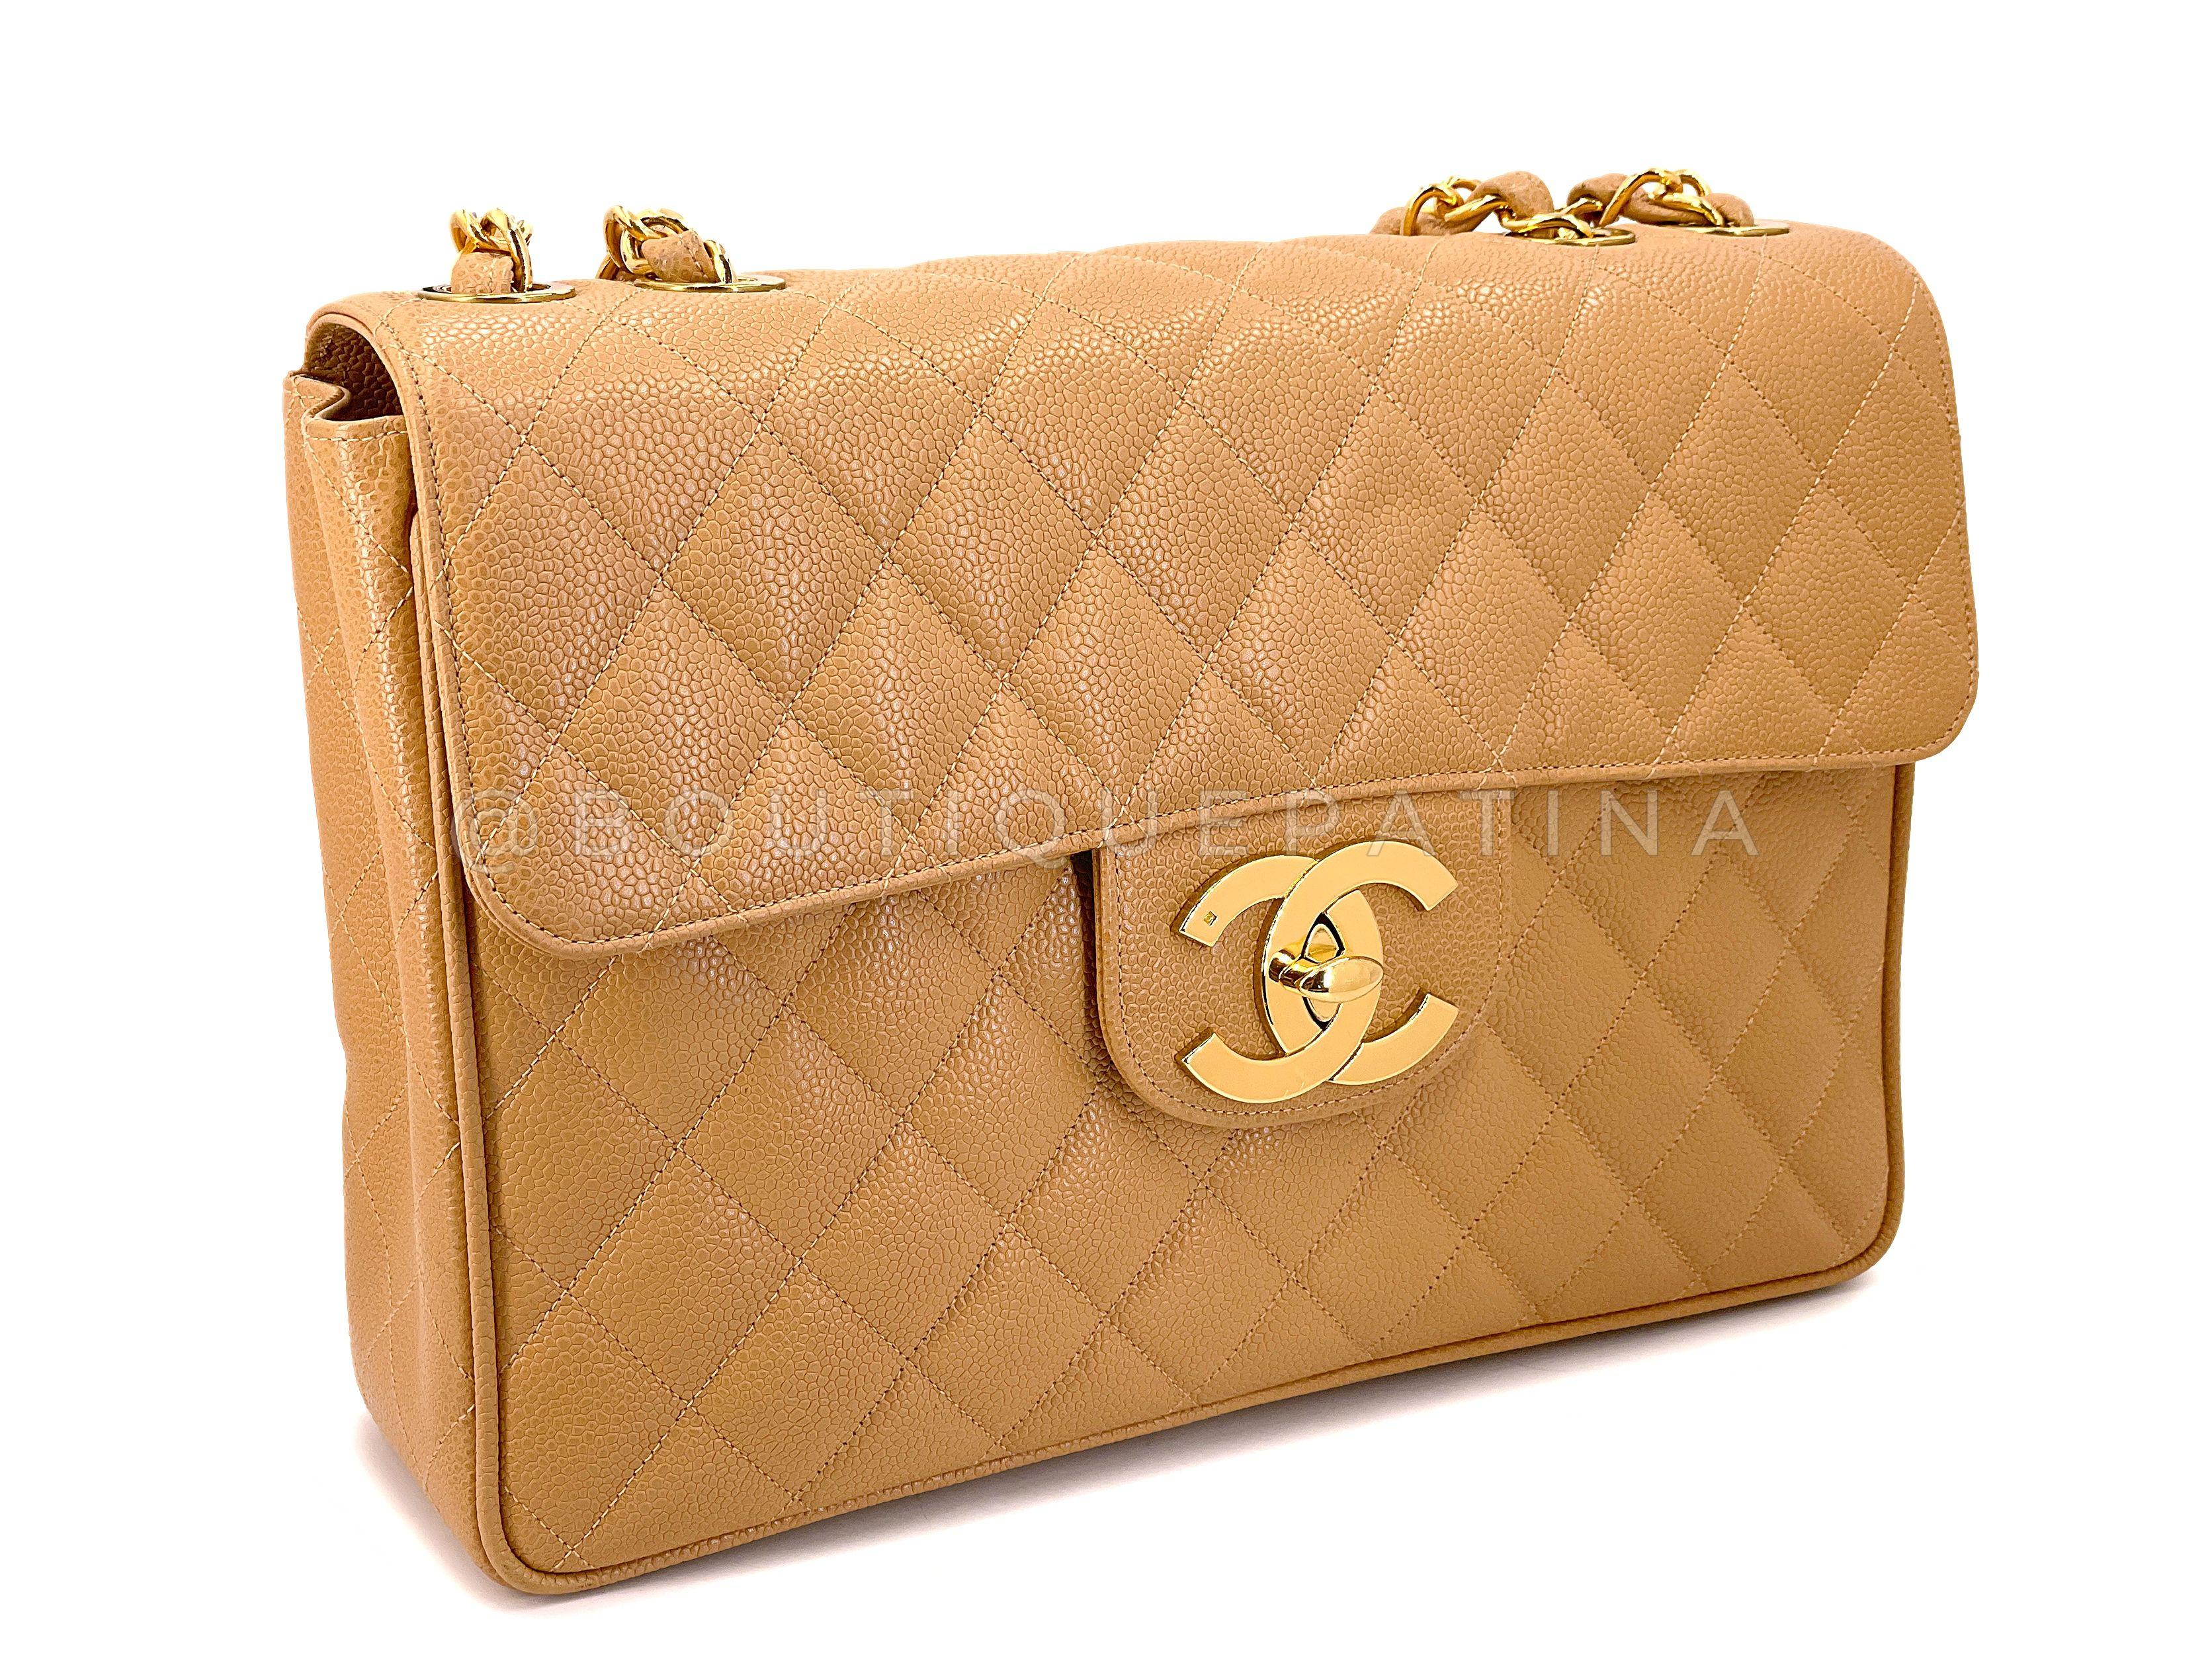 Chanel 1994 Vintage Caramel Beige Caviar Jumbo Classic Flap Bag 24k GHW 67741 In Excellent Condition For Sale In Costa Mesa, CA